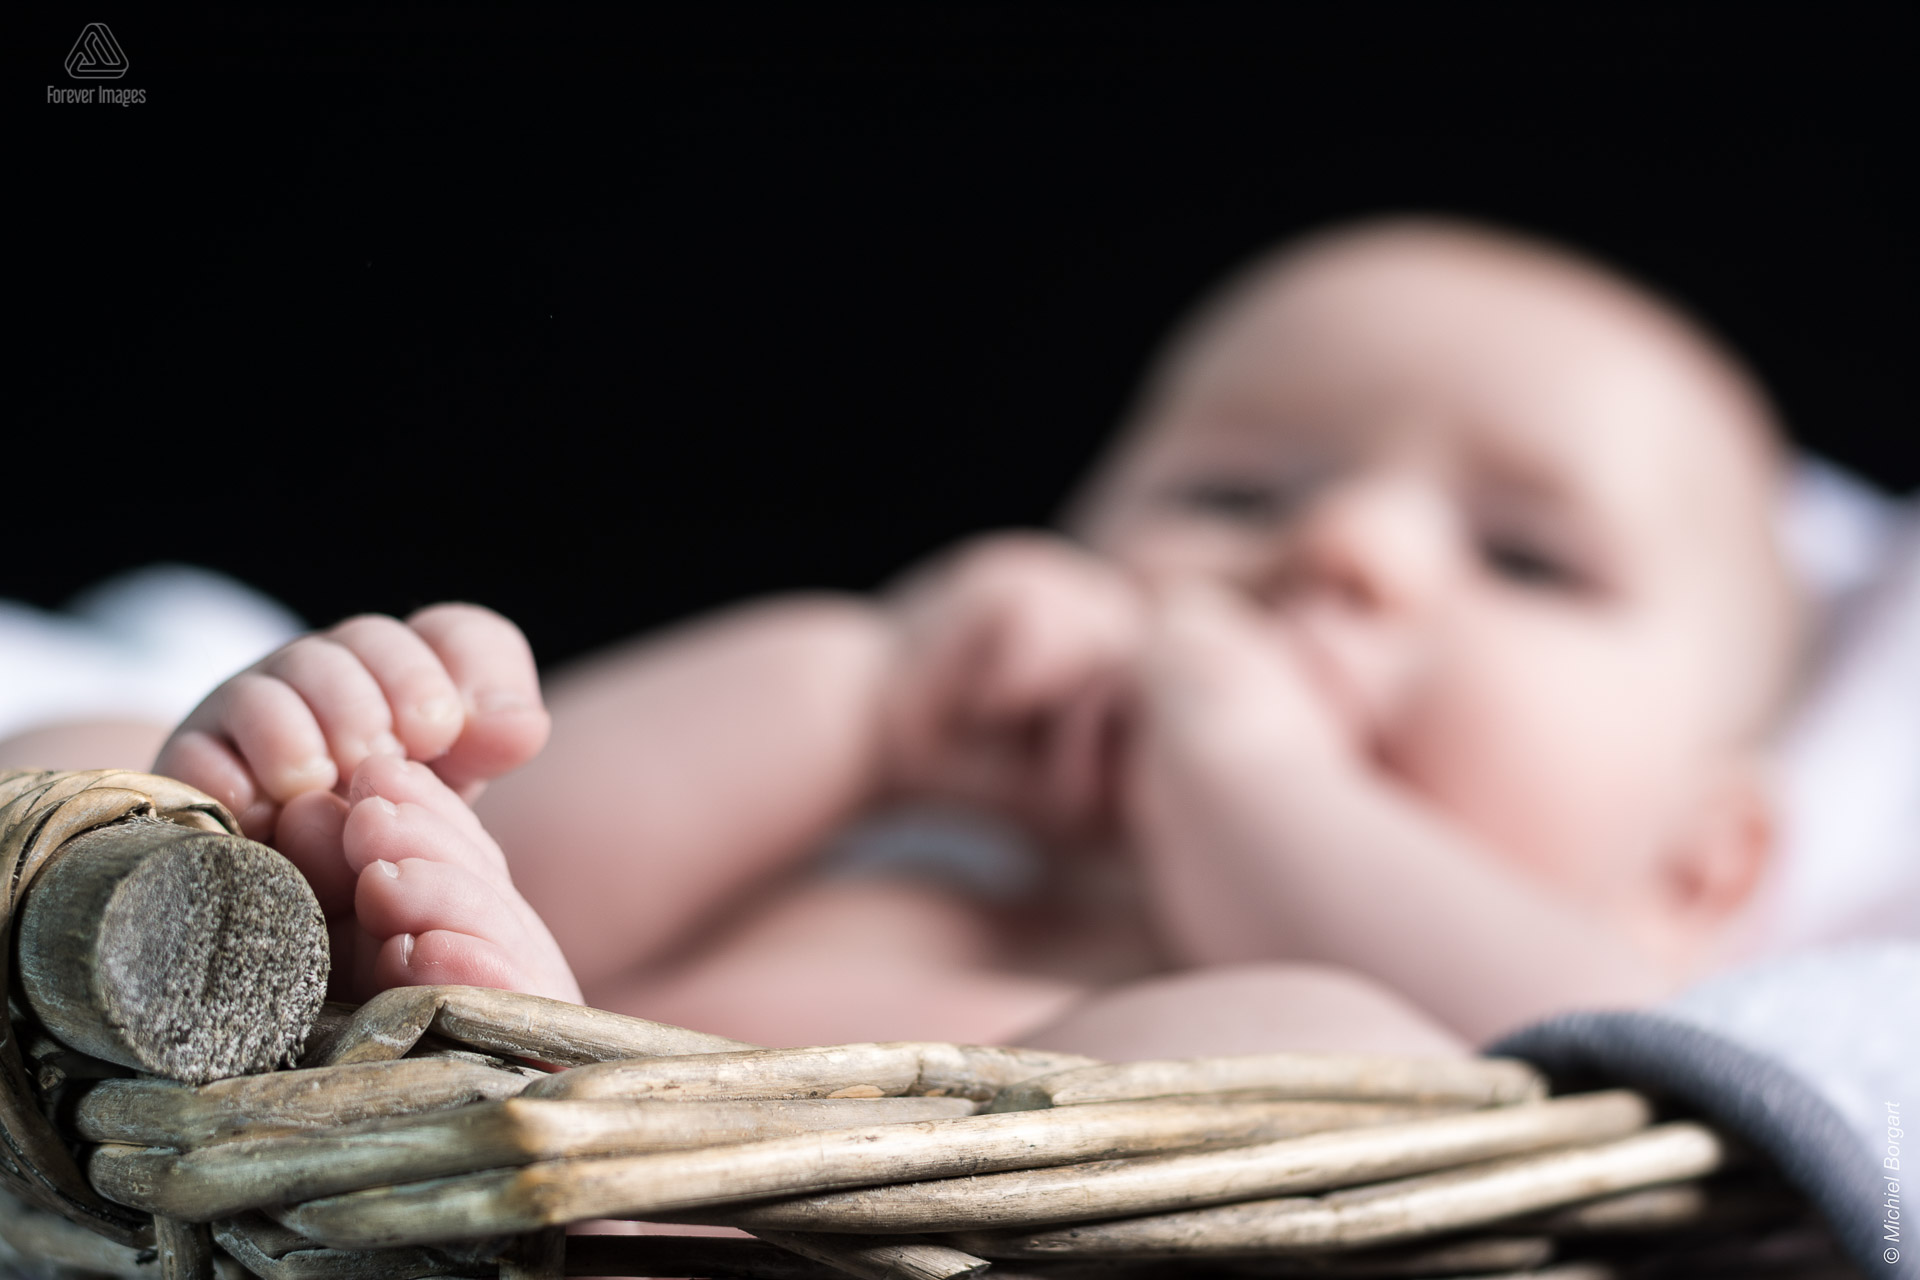 Child photo baby in a wicker basket with the focus on his toes | Elias | Portrait Photographer Michiel Borgart - Forever Images.